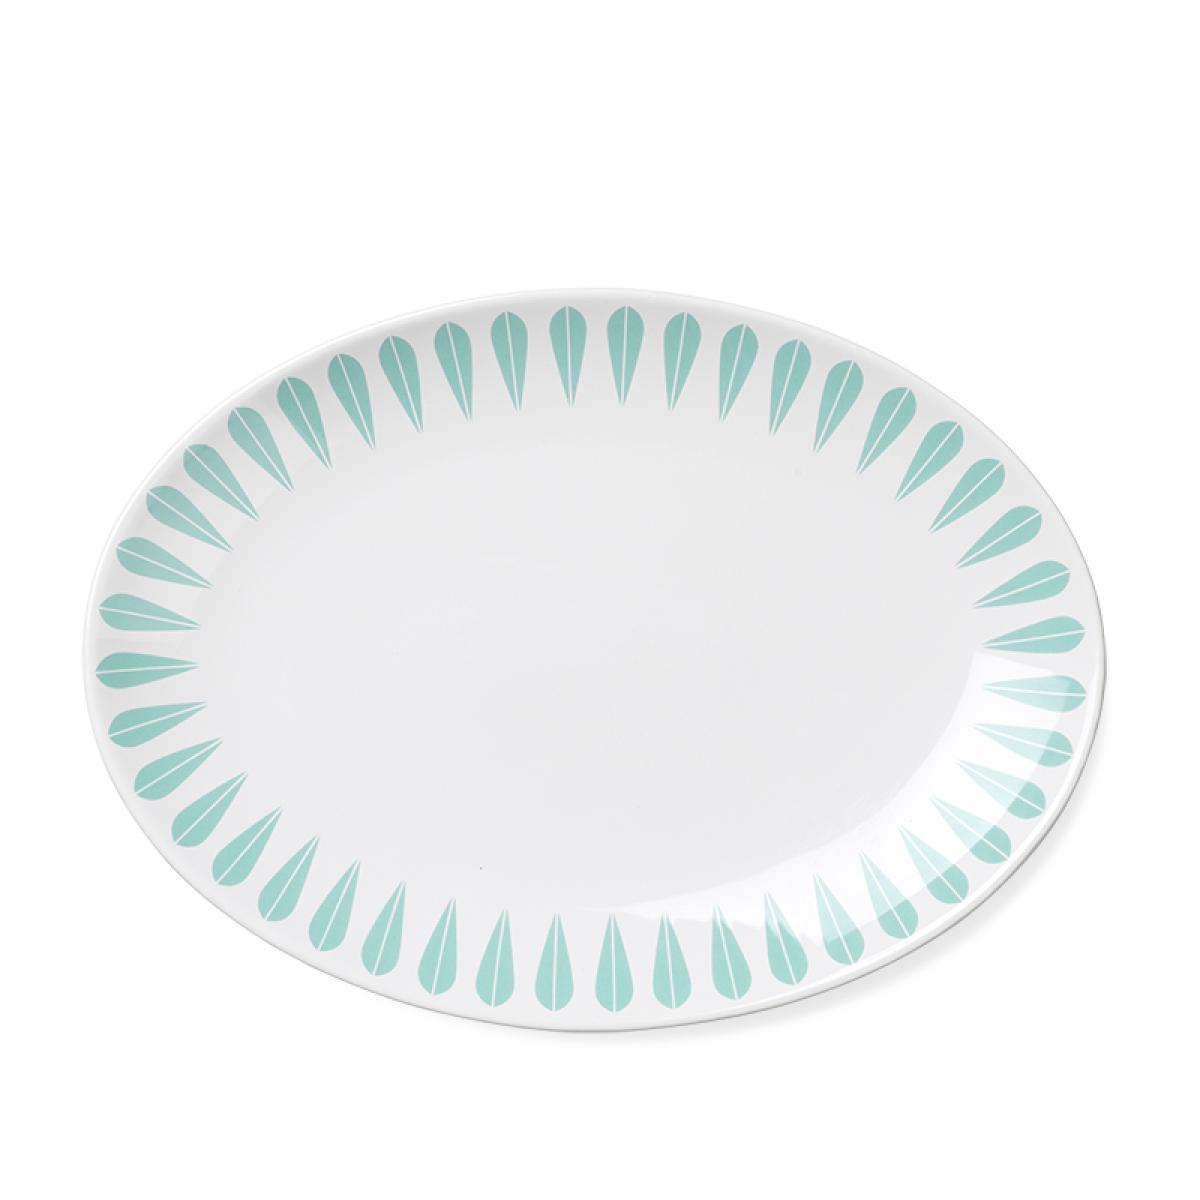 Lucie Kaas Arne Clausen Collection Serving Plate Mint Green, 34cm